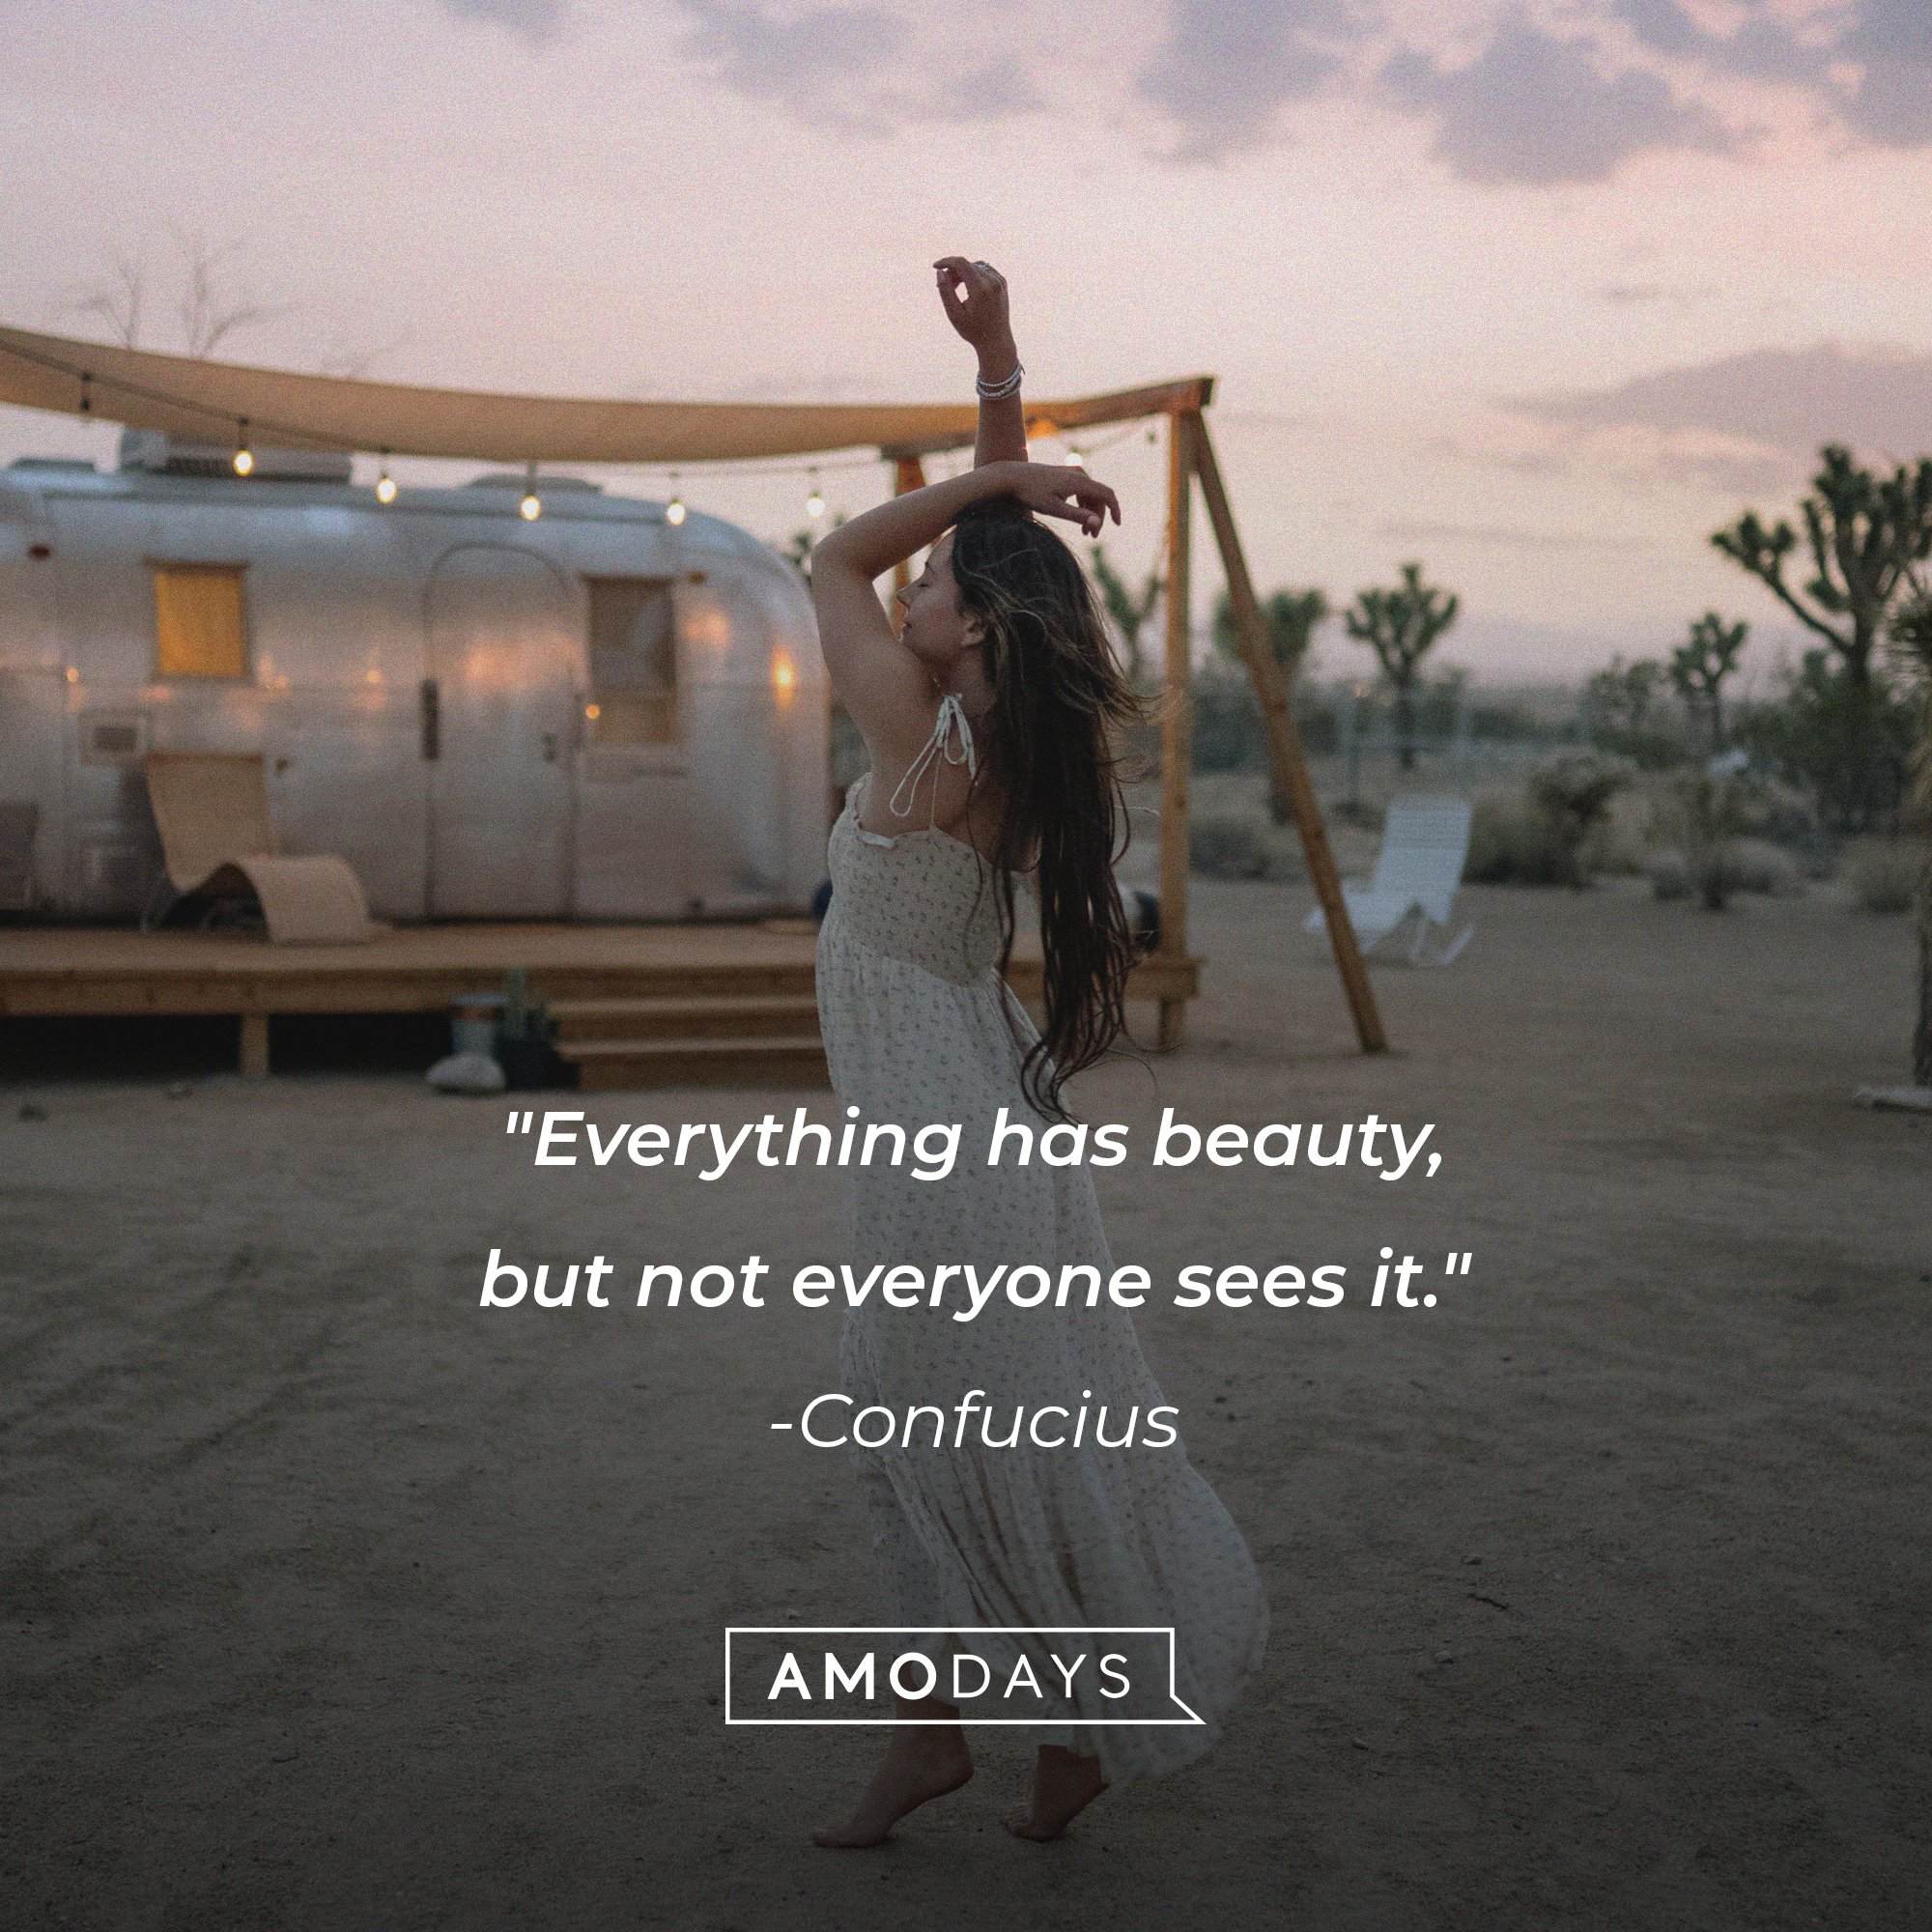 Confucius’ quote: "Everything has beauty, but not everyone sees it." | Image: AmoDays 